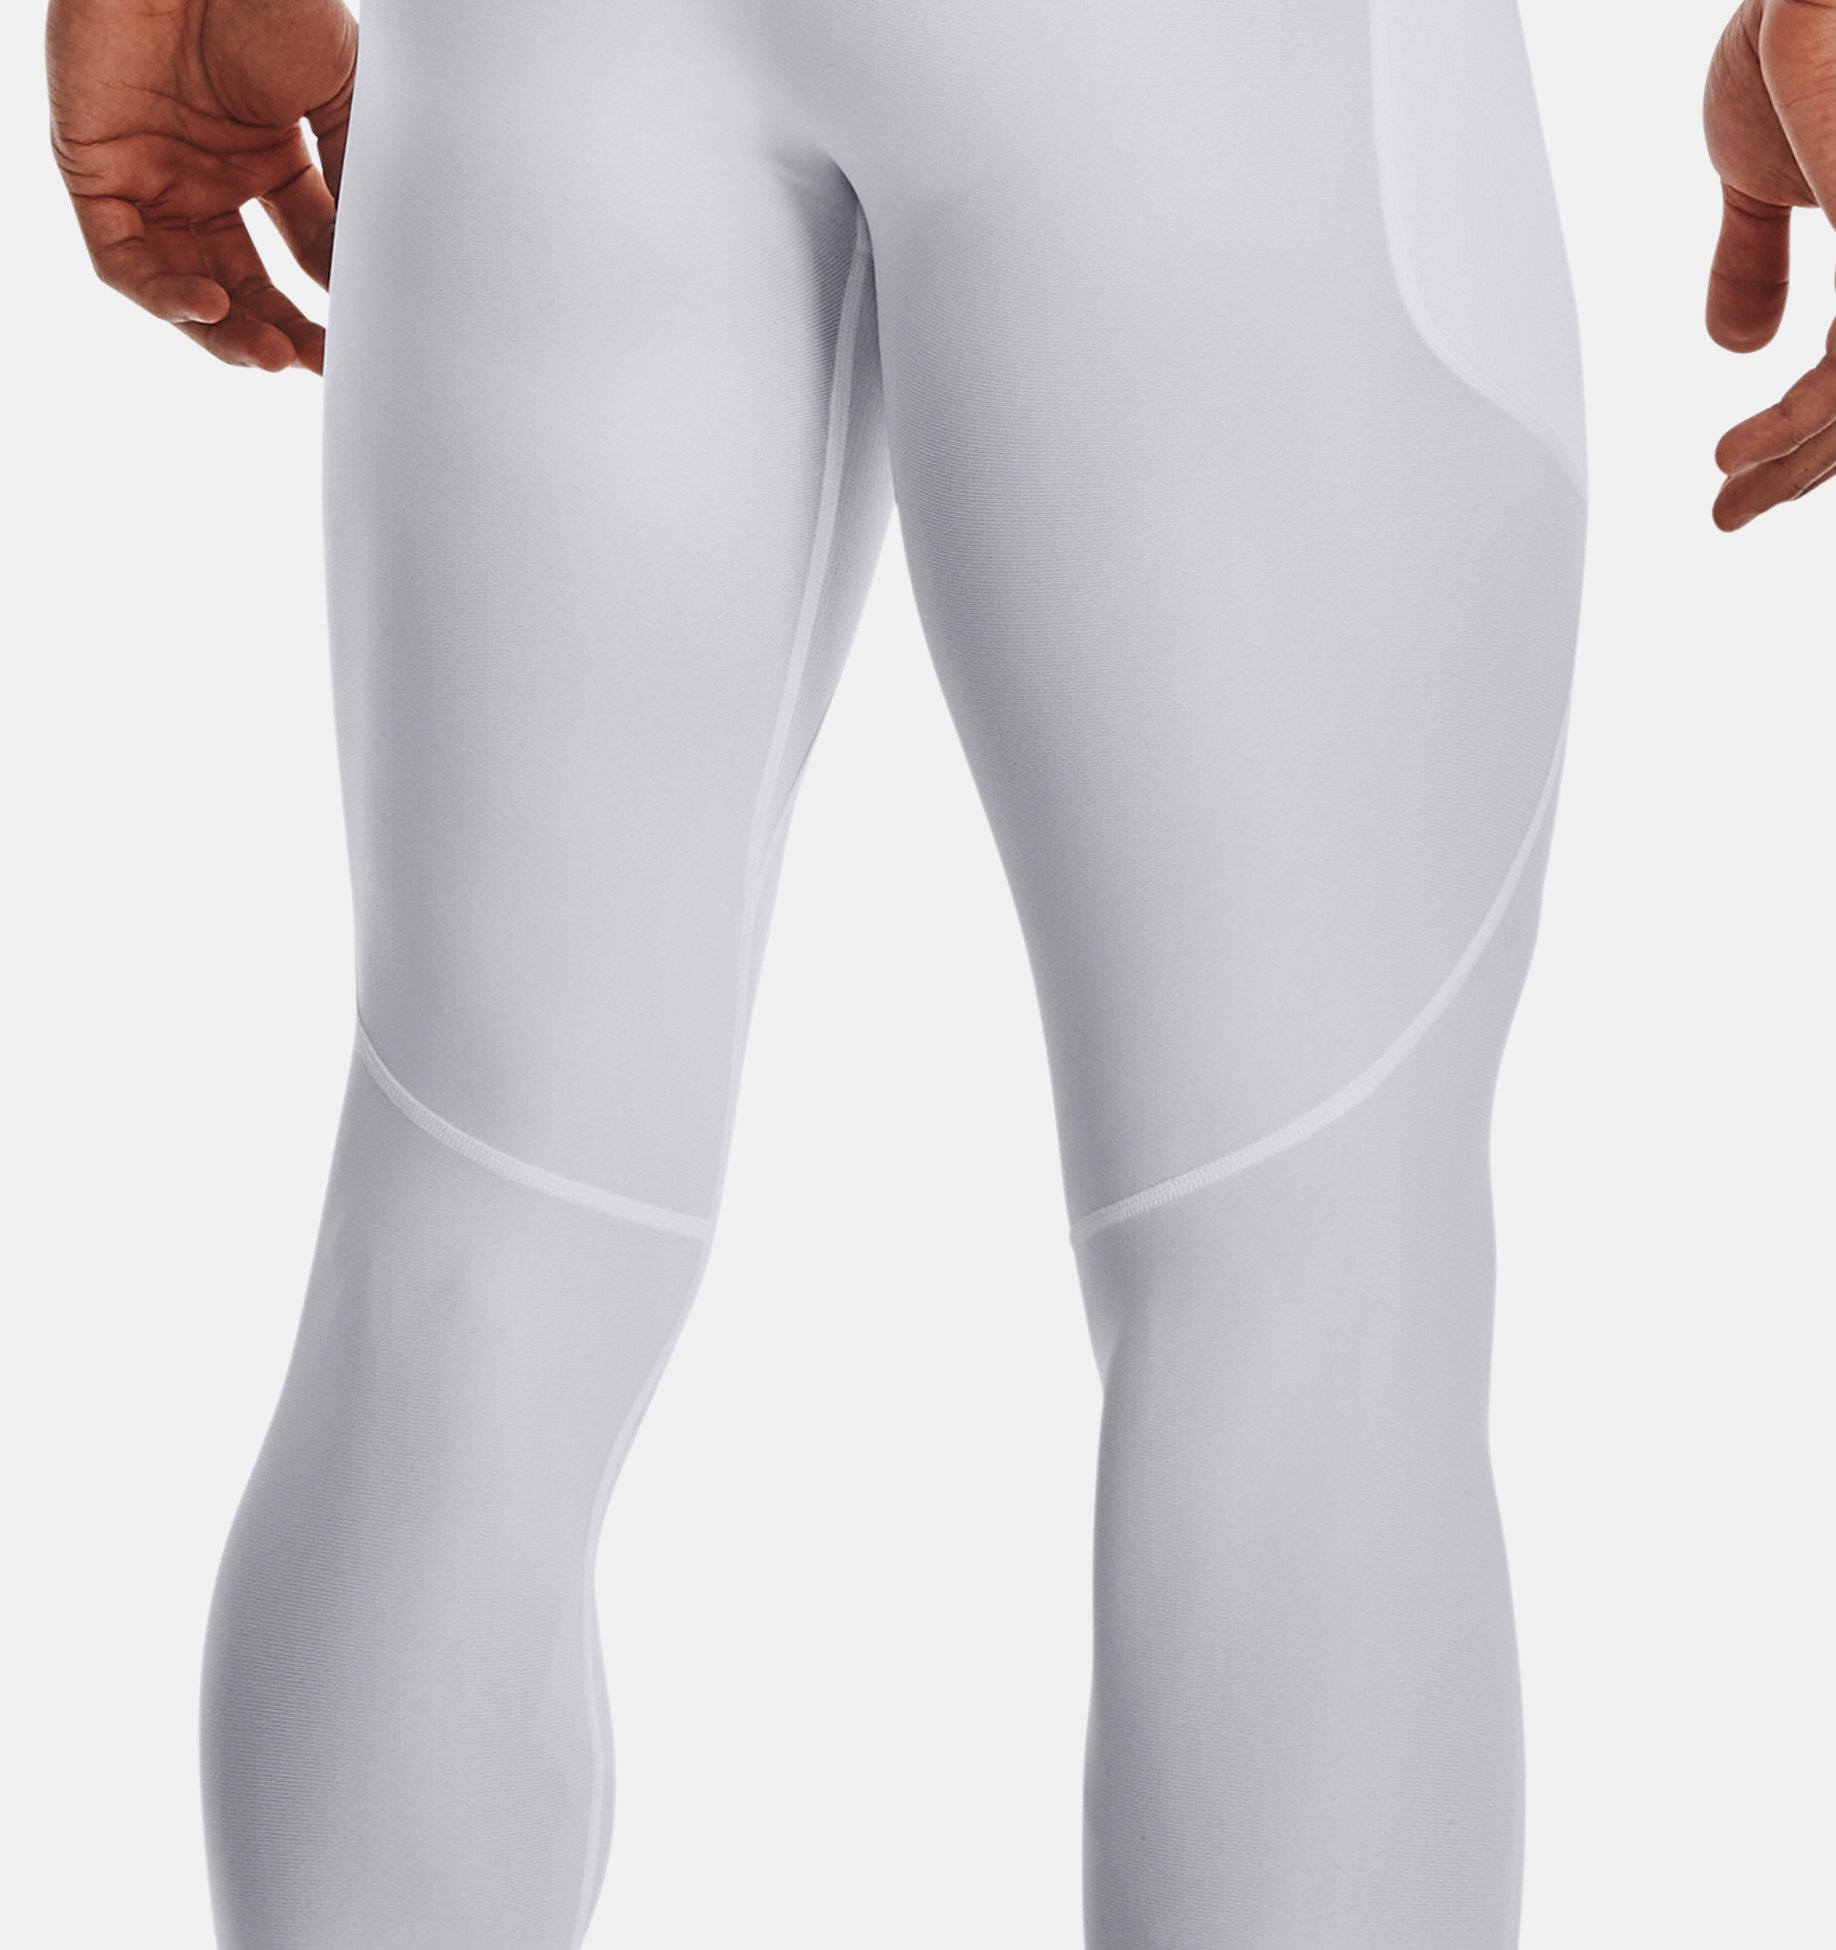 Under Armour Heat Gear Compression Tights – Purchase Officials